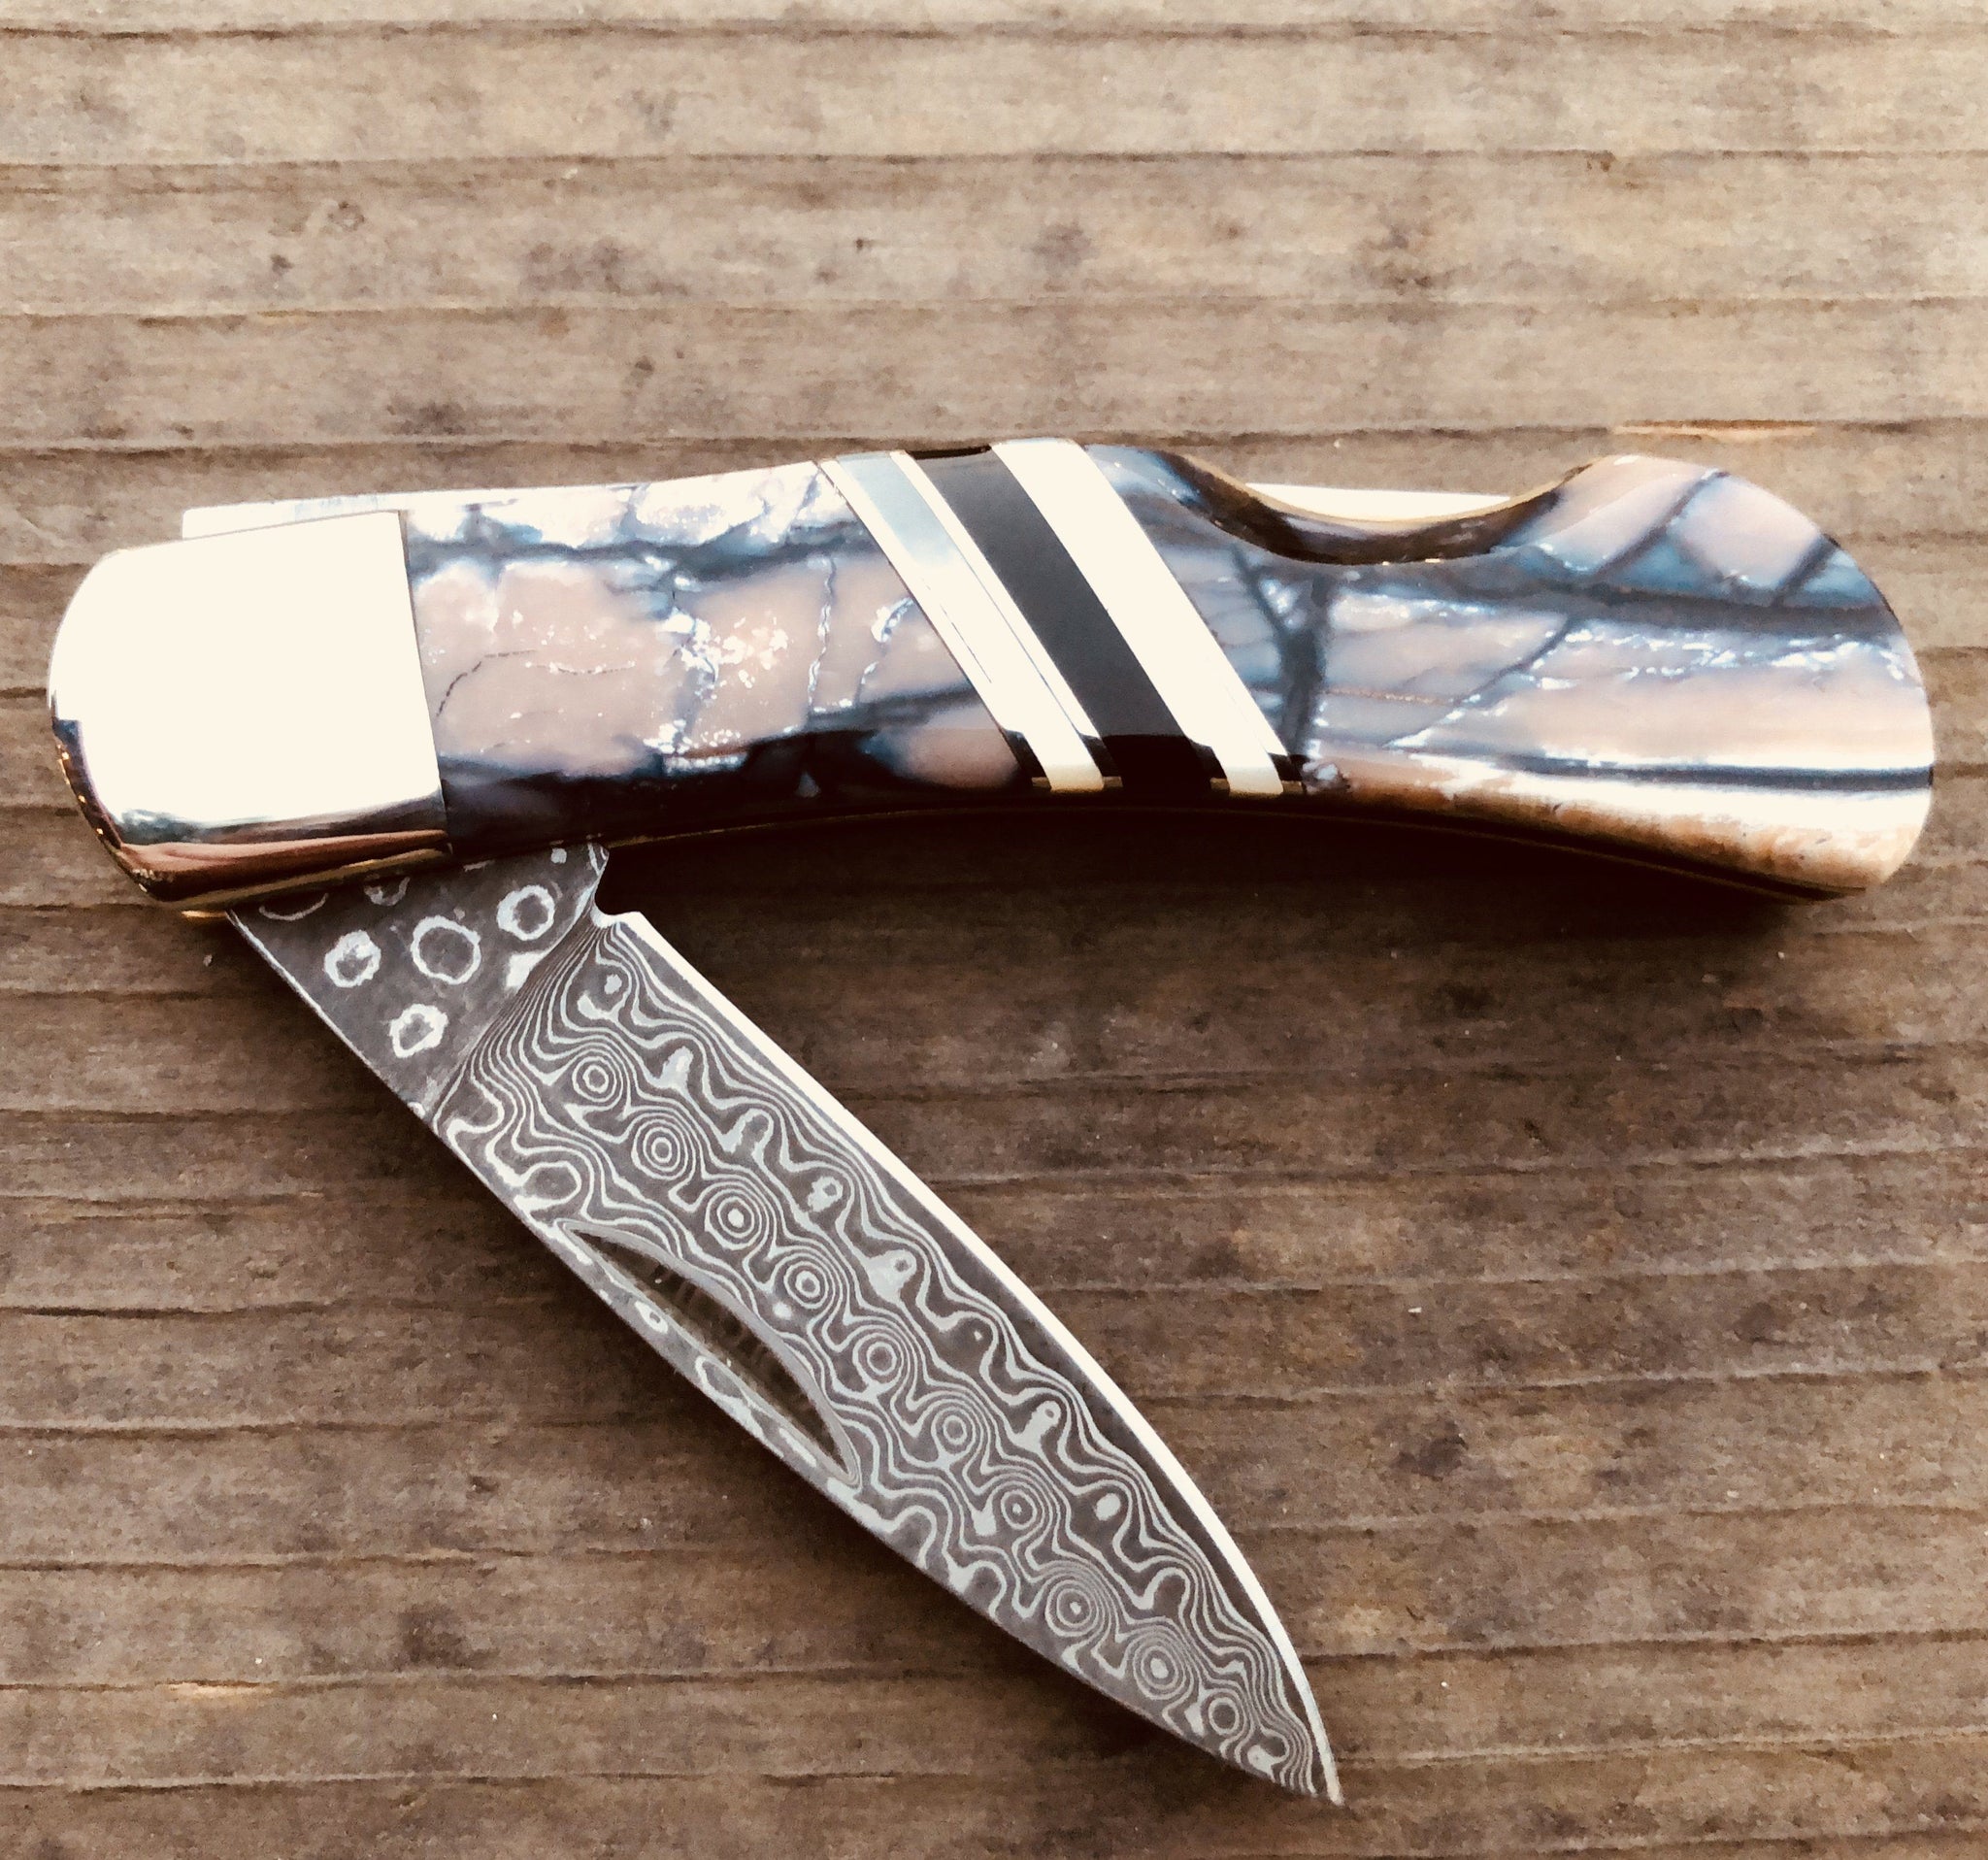 Woolly Mammoth Tusk and Damascus Steel Folding Pocket Knife (VERY